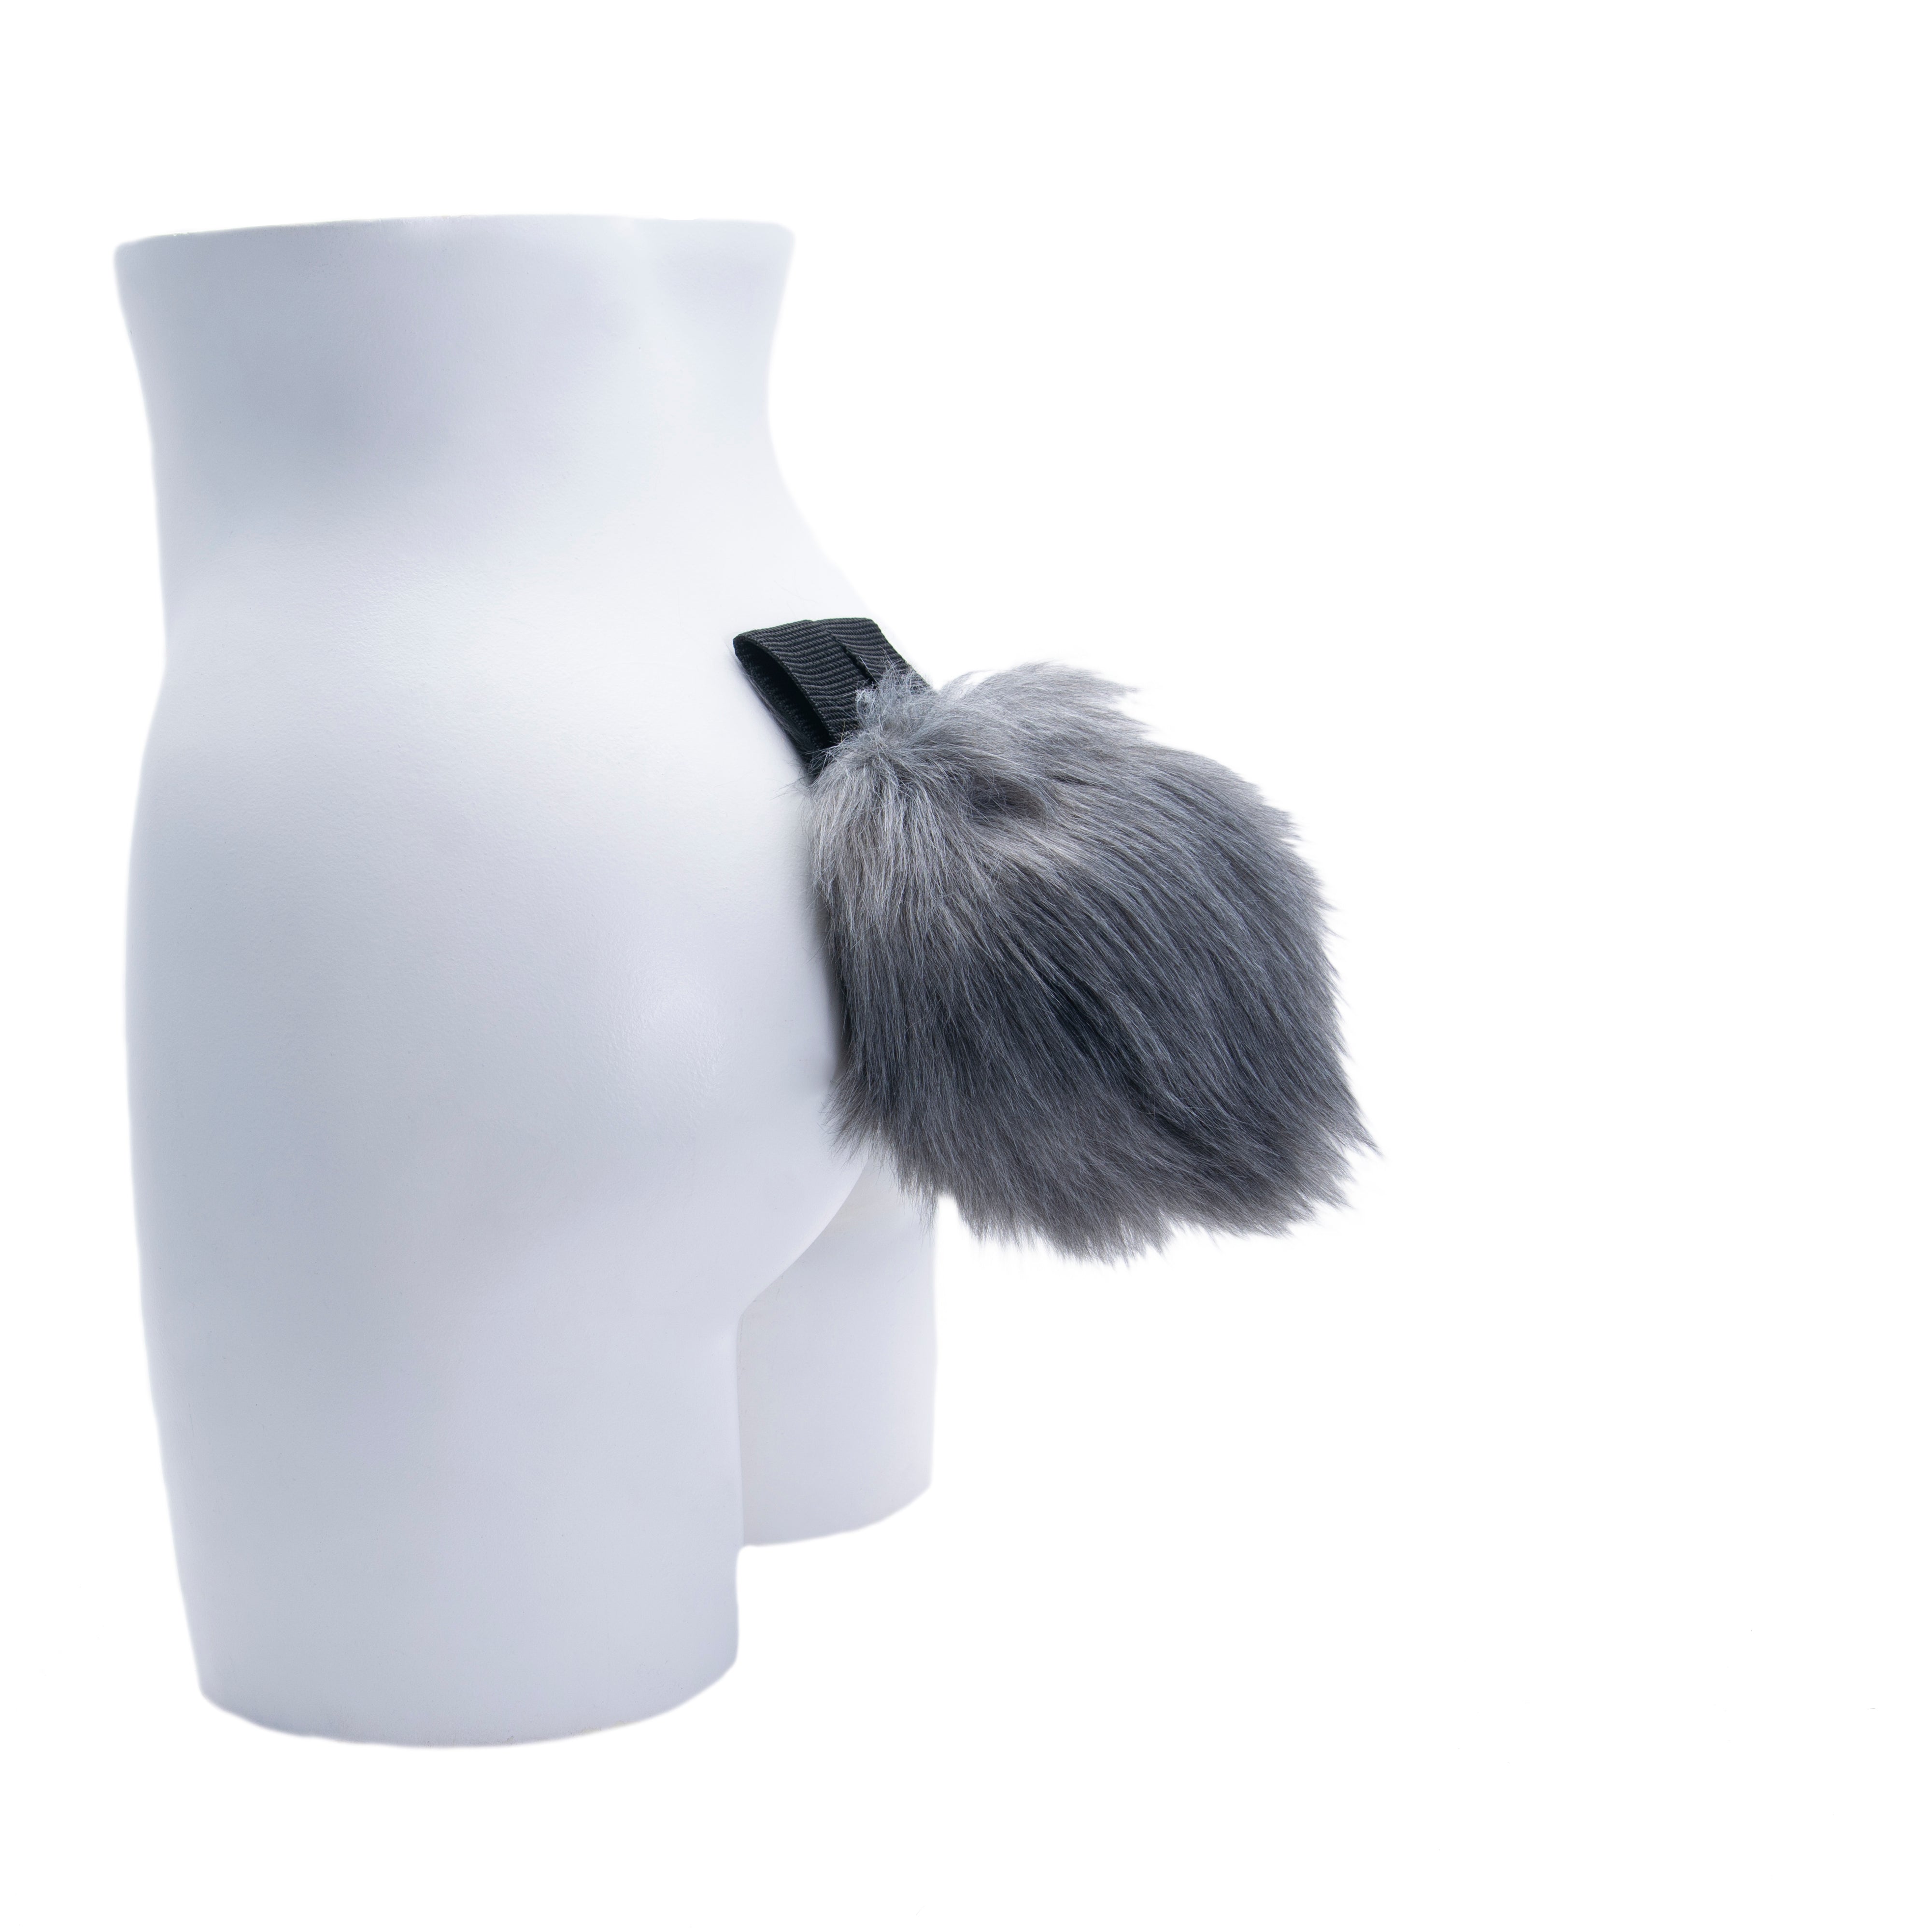 grey  Pawstar faux fur bunny rabbit tail. Perfect for Halloween costumes, cosplay, fursuits and more. Made in the usa